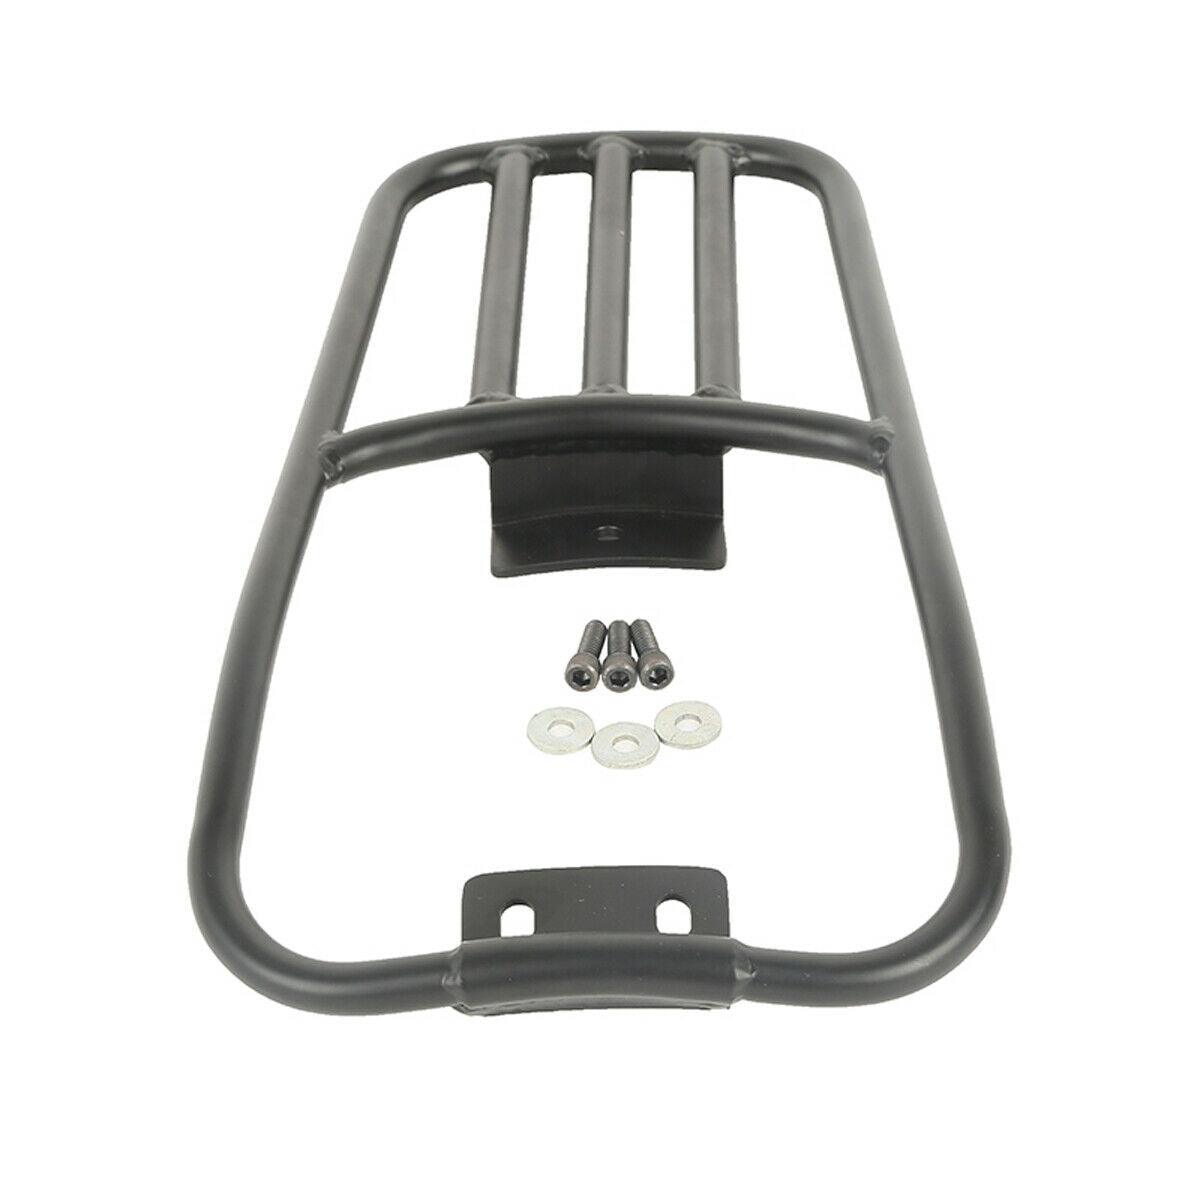 Rear Fender Luggage Rack Fit For Harley Softail Deluxe 06-18 Fatboy 07-17 Black - Moto Life Products